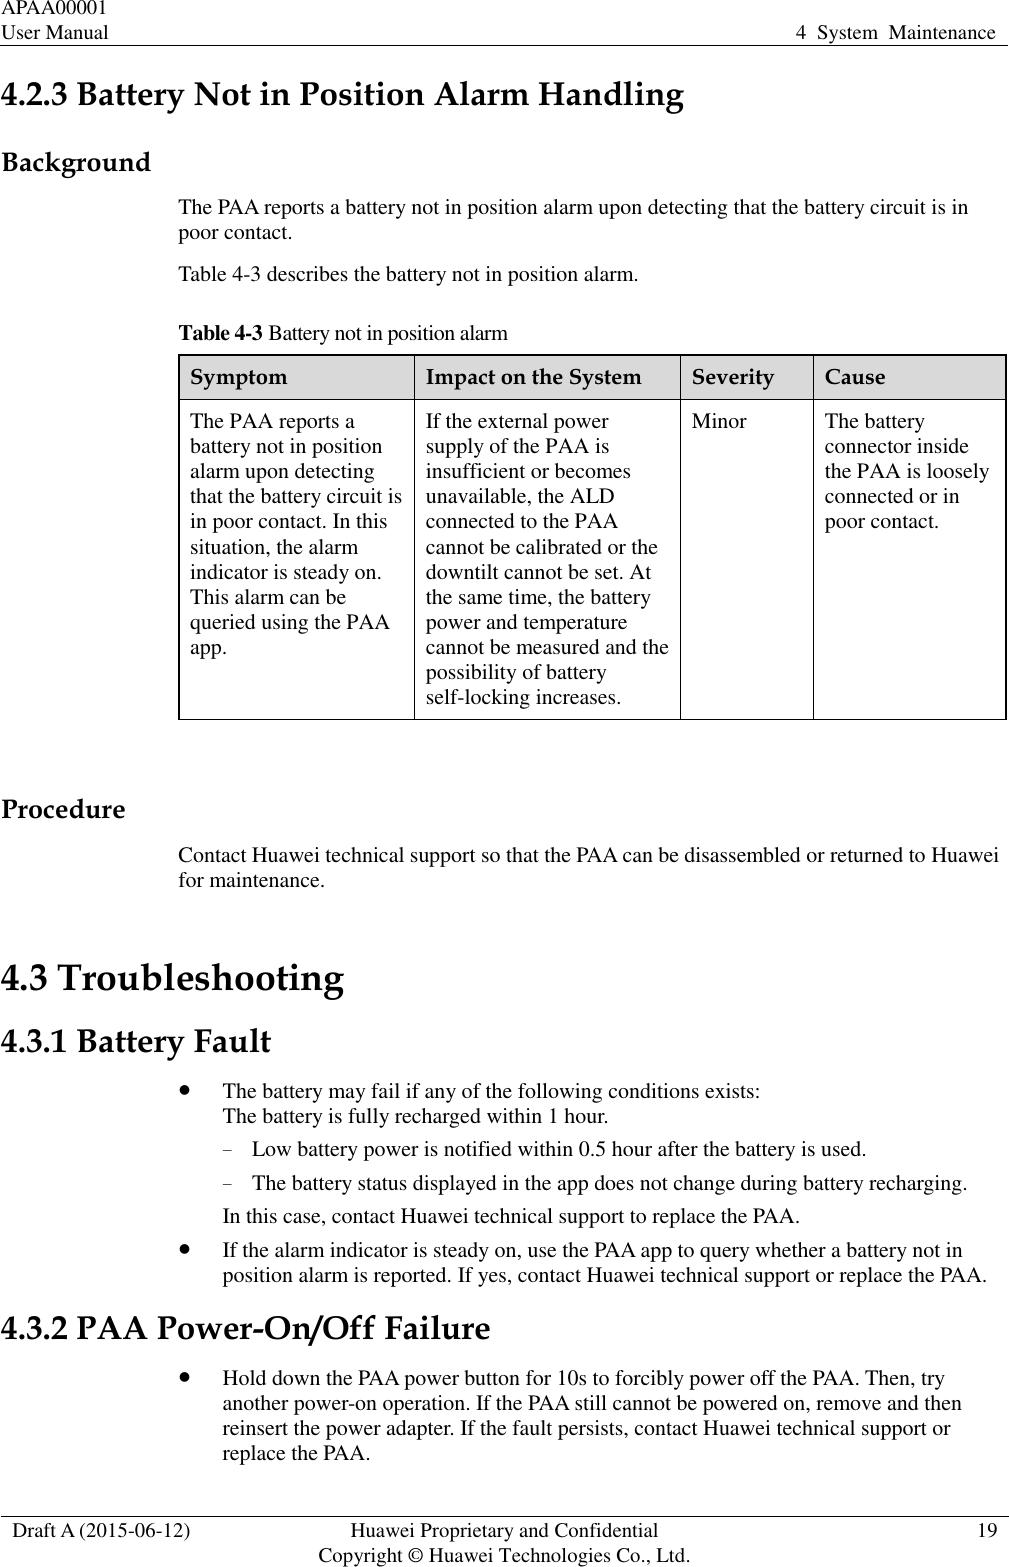 APAA00001 User Manual 4  System  Maintenance  Draft A (2015-06-12) Huawei Proprietary and Confidential           Copyright © Huawei Technologies Co., Ltd. 19  4.2.3 Battery Not in Position Alarm Handling Background The PAA reports a battery not in position alarm upon detecting that the battery circuit is in poor contact.   Table 4-3 describes the battery not in position alarm. Table 4-3 Battery not in position alarm Symptom Impact on the System Severity Cause The PAA reports a battery not in position alarm upon detecting that the battery circuit is in poor contact. In this situation, the alarm indicator is steady on. This alarm can be queried using the PAA app.   If the external power supply of the PAA is insufficient or becomes unavailable, the ALD connected to the PAA cannot be calibrated or the downtilt cannot be set. At the same time, the battery power and temperature cannot be measured and the possibility of battery self-locking increases.   Minor The battery connector inside the PAA is loosely connected or in poor contact.    Procedure Contact Huawei technical support so that the PAA can be disassembled or returned to Huawei for maintenance. 4.3 Troubleshooting 4.3.1 Battery Fault  The battery may fail if any of the following conditions exists: The battery is fully recharged within 1 hour.   − Low battery power is notified within 0.5 hour after the battery is used. − The battery status displayed in the app does not change during battery recharging. In this case, contact Huawei technical support to replace the PAA.    If the alarm indicator is steady on, use the PAA app to query whether a battery not in position alarm is reported. If yes, contact Huawei technical support or replace the PAA.   4.3.2 PAA Power-On/Off Failure  Hold down the PAA power button for 10s to forcibly power off the PAA. Then, try another power-on operation. If the PAA still cannot be powered on, remove and then reinsert the power adapter. If the fault persists, contact Huawei technical support or replace the PAA. 